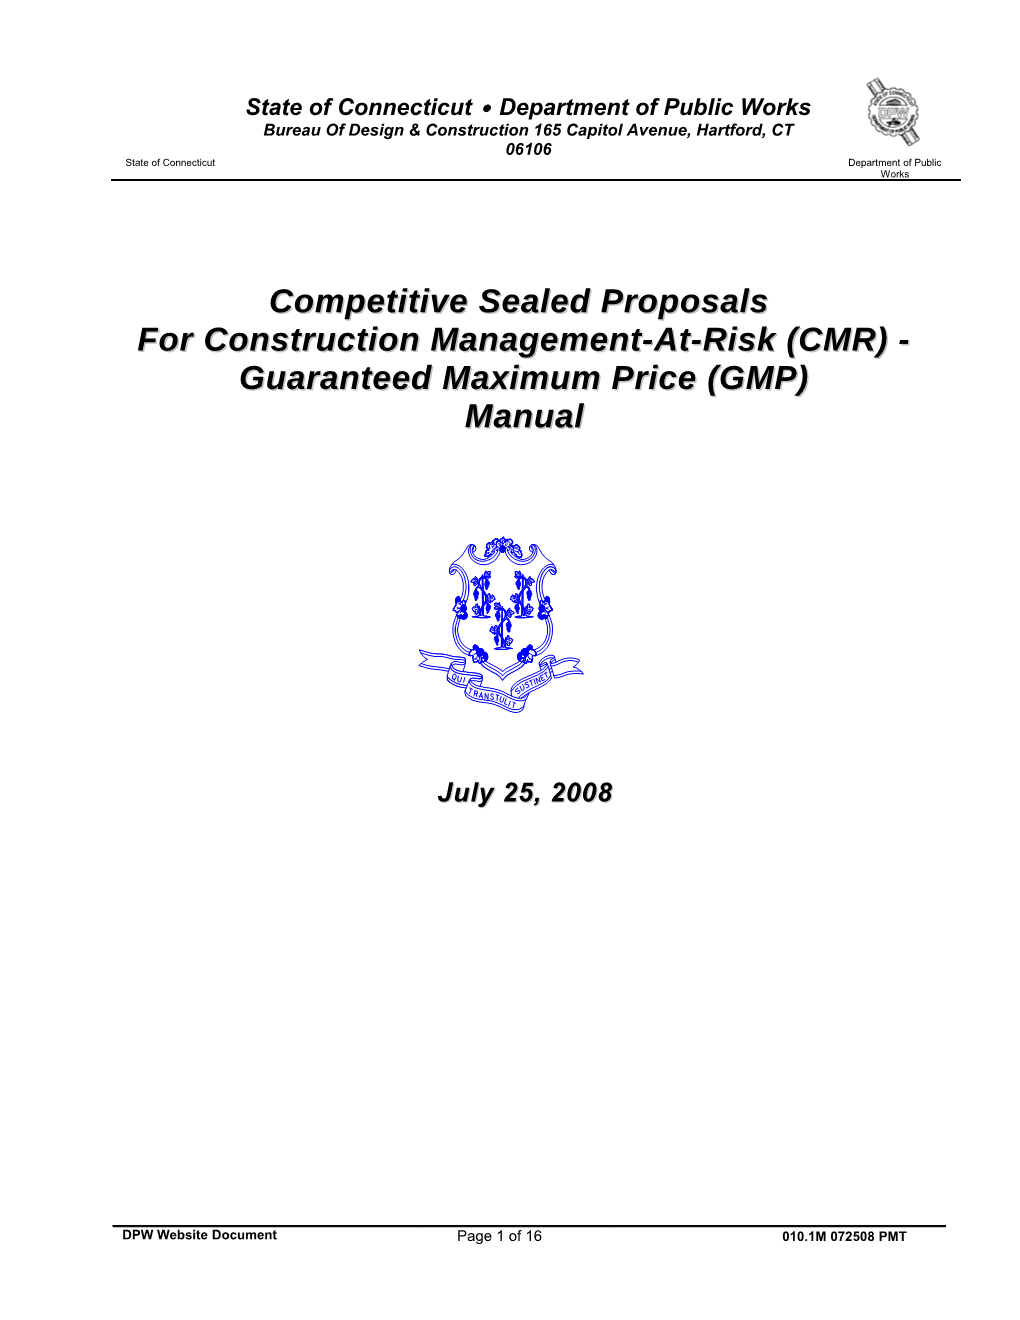 For Construction Management-At-Risk (CMR) - Guaranteed Maximum Price (GMP)